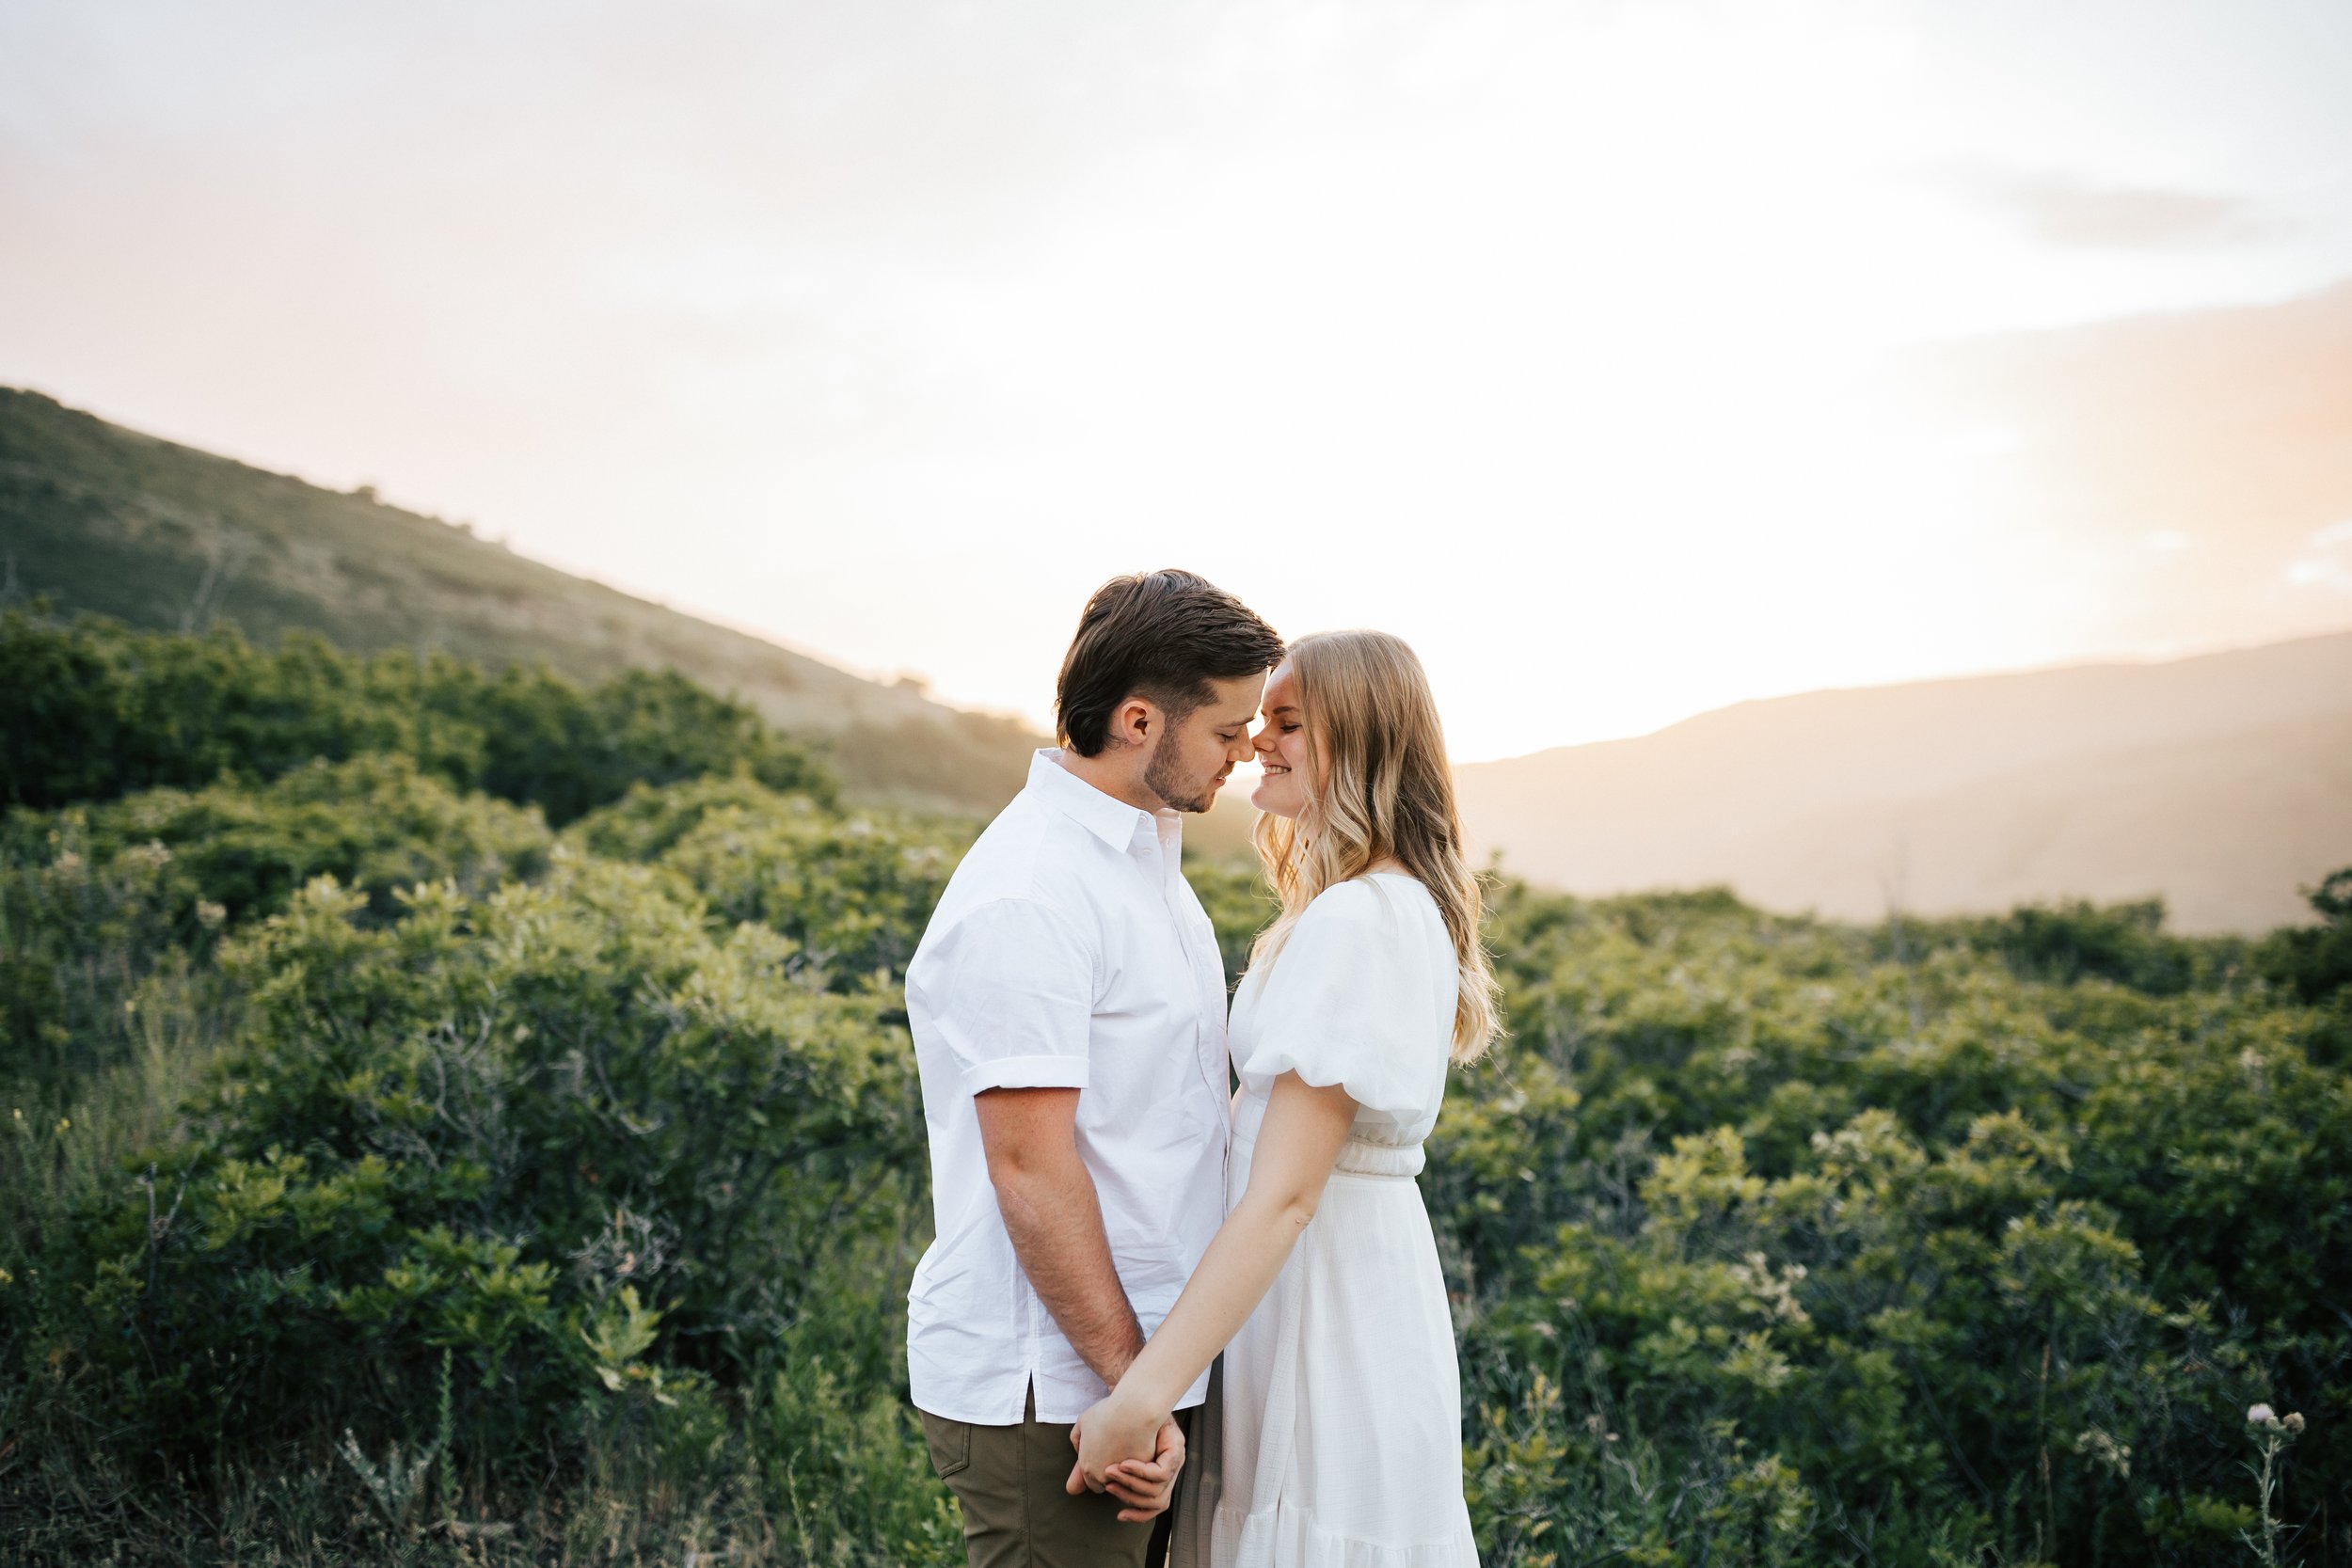  Summer anniversary couples session in the mountains. A young couple kisses with the sun glowing behind them during golden hour. Utah photographer. #utahphotographer #utahengagements  